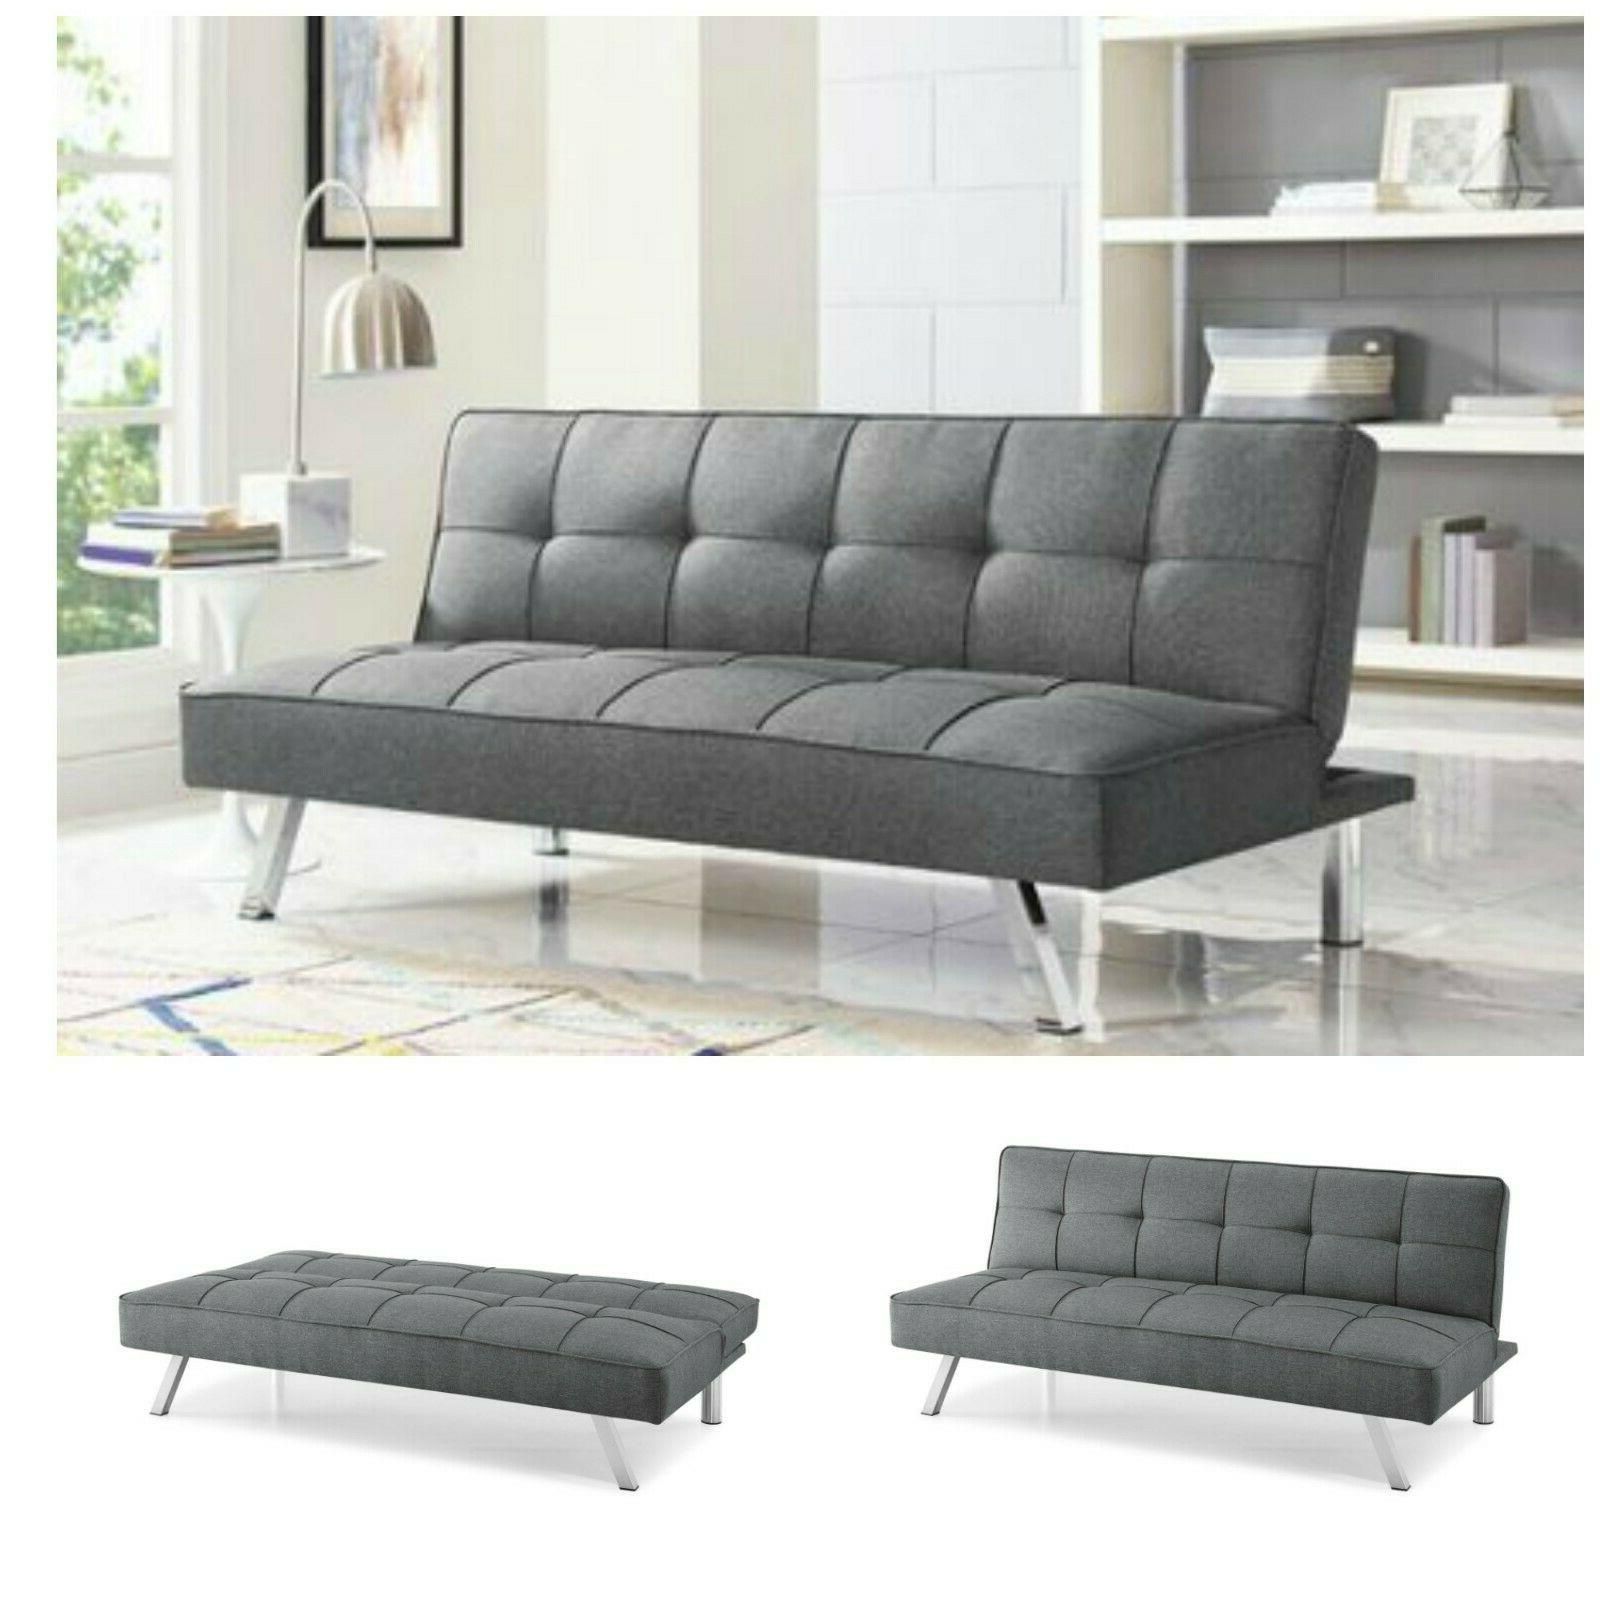 Sleeper Sofa Bed Grey Gray Convertible Couch Modern Pertaining To Convertible Gray Loveseat Sleepers (View 13 of 20)